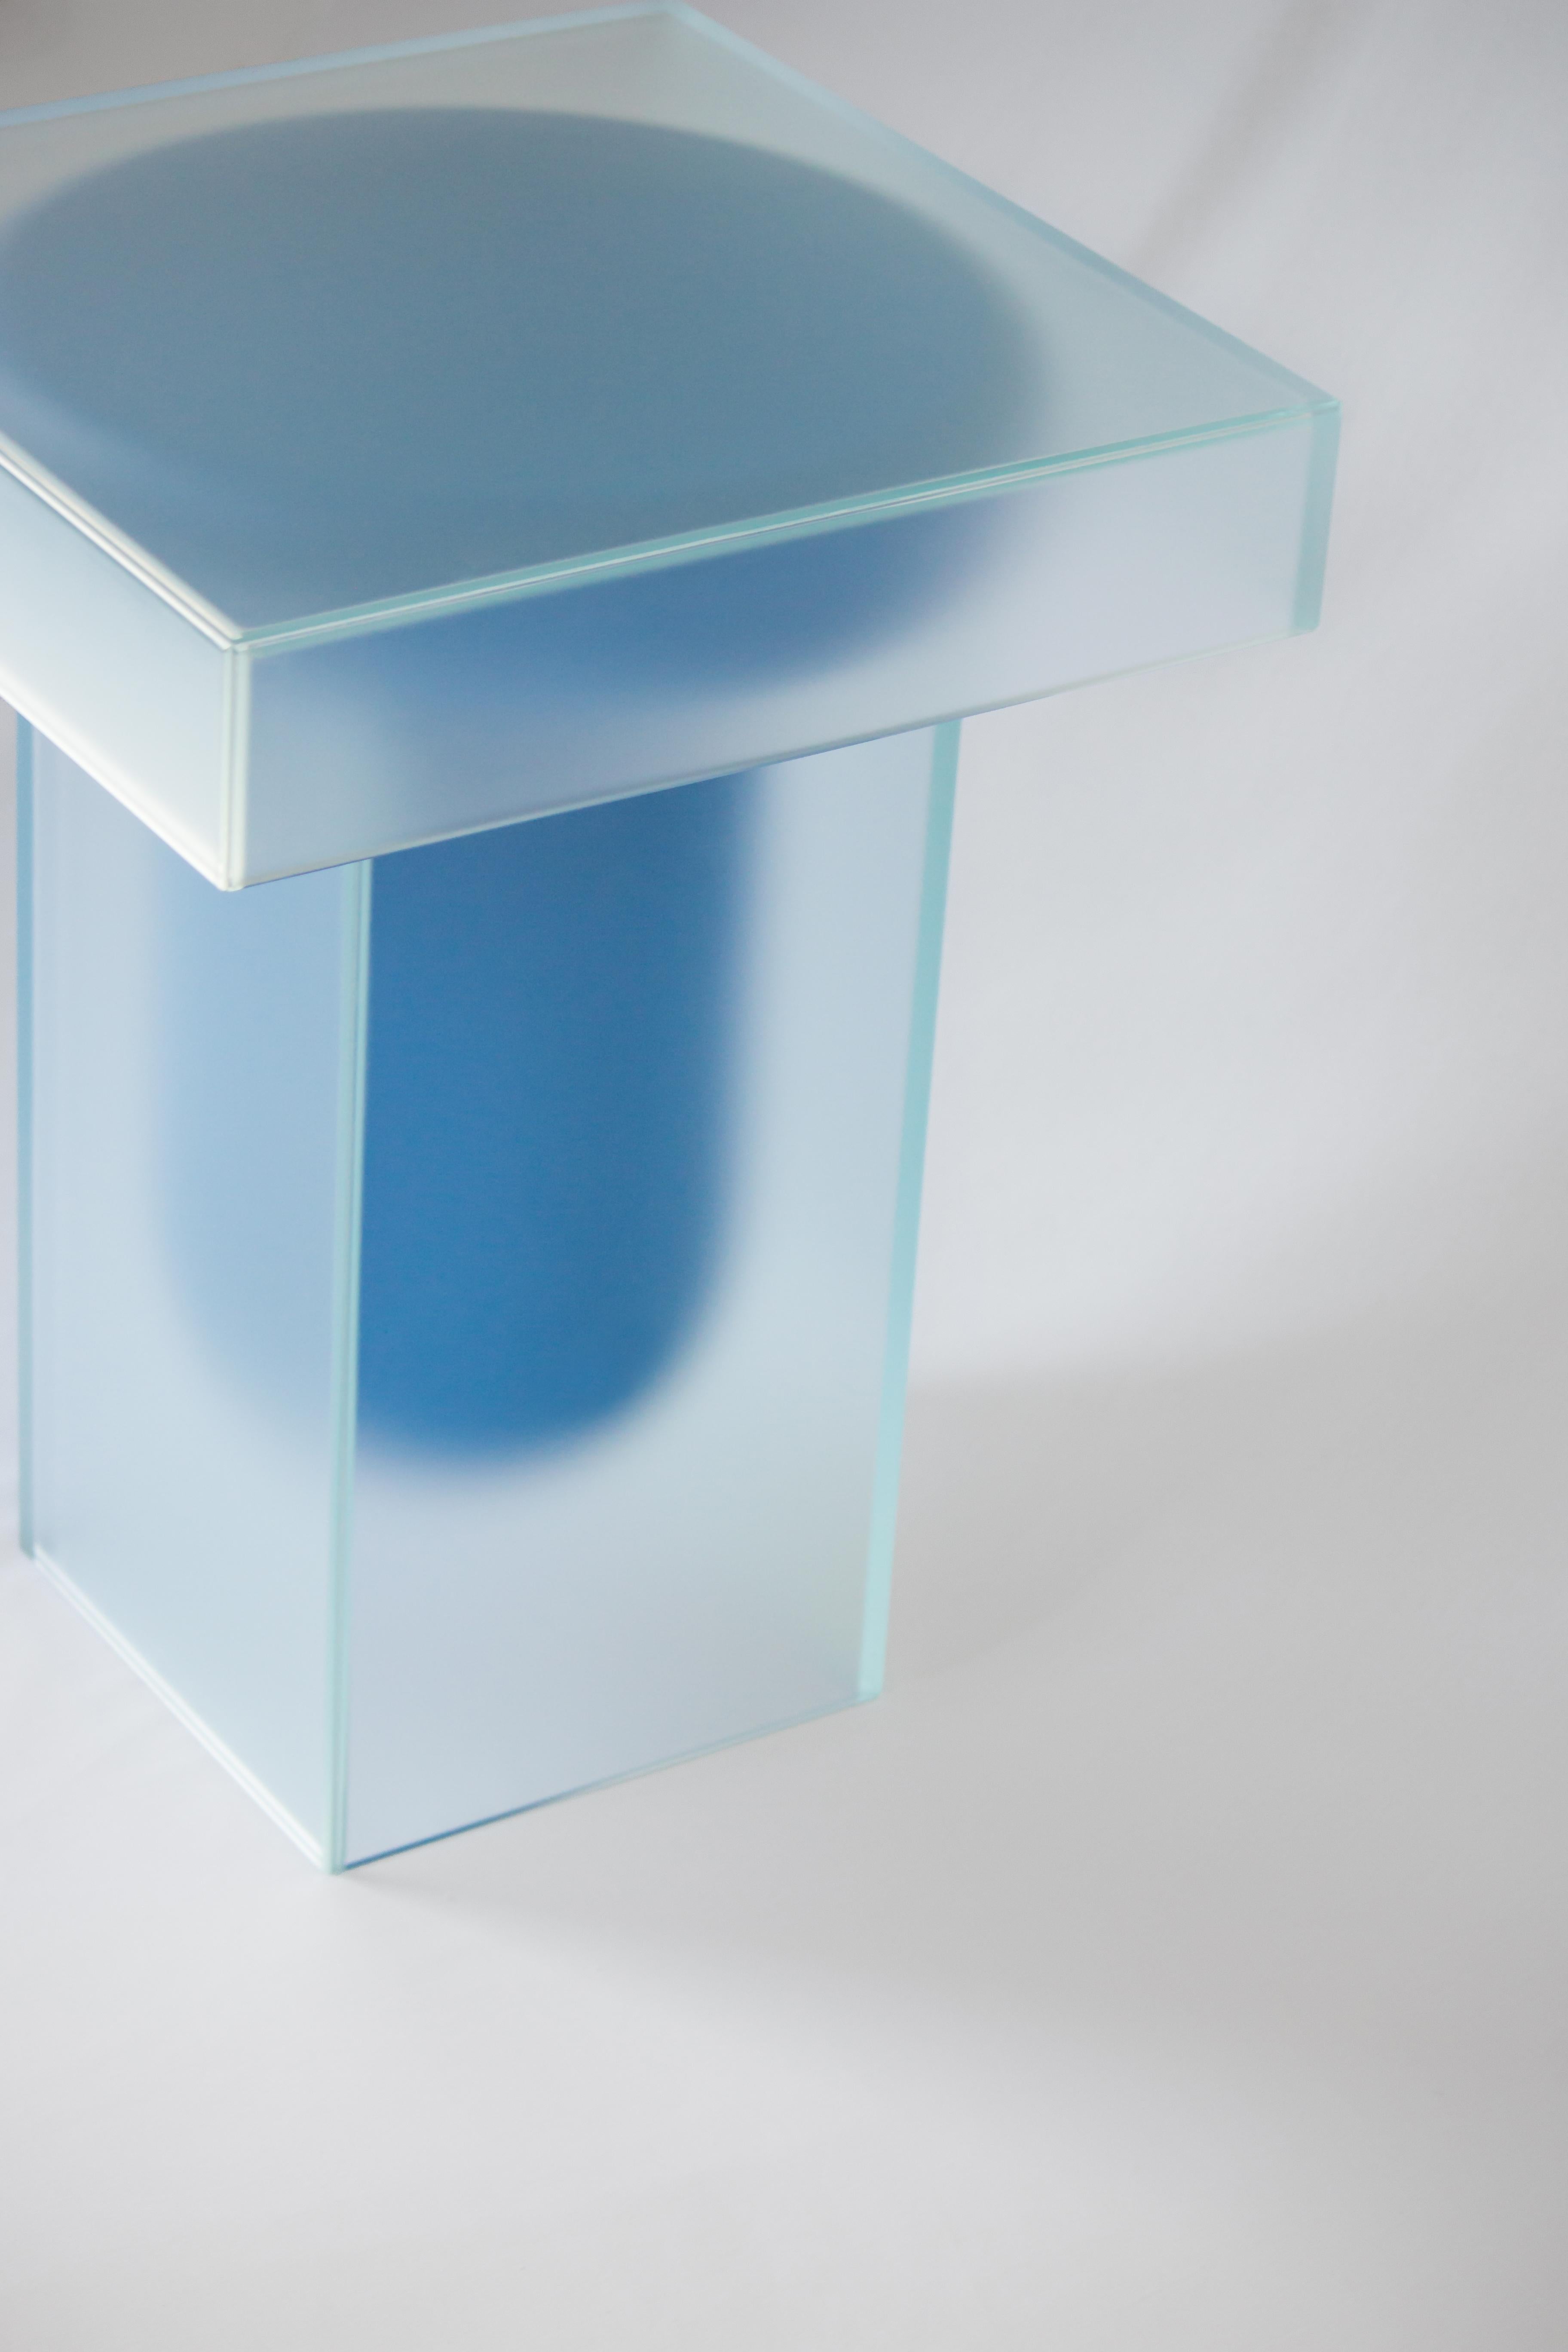 Contemporary Side Coffee Table in Frosted Glass and Blue For Sale at ...